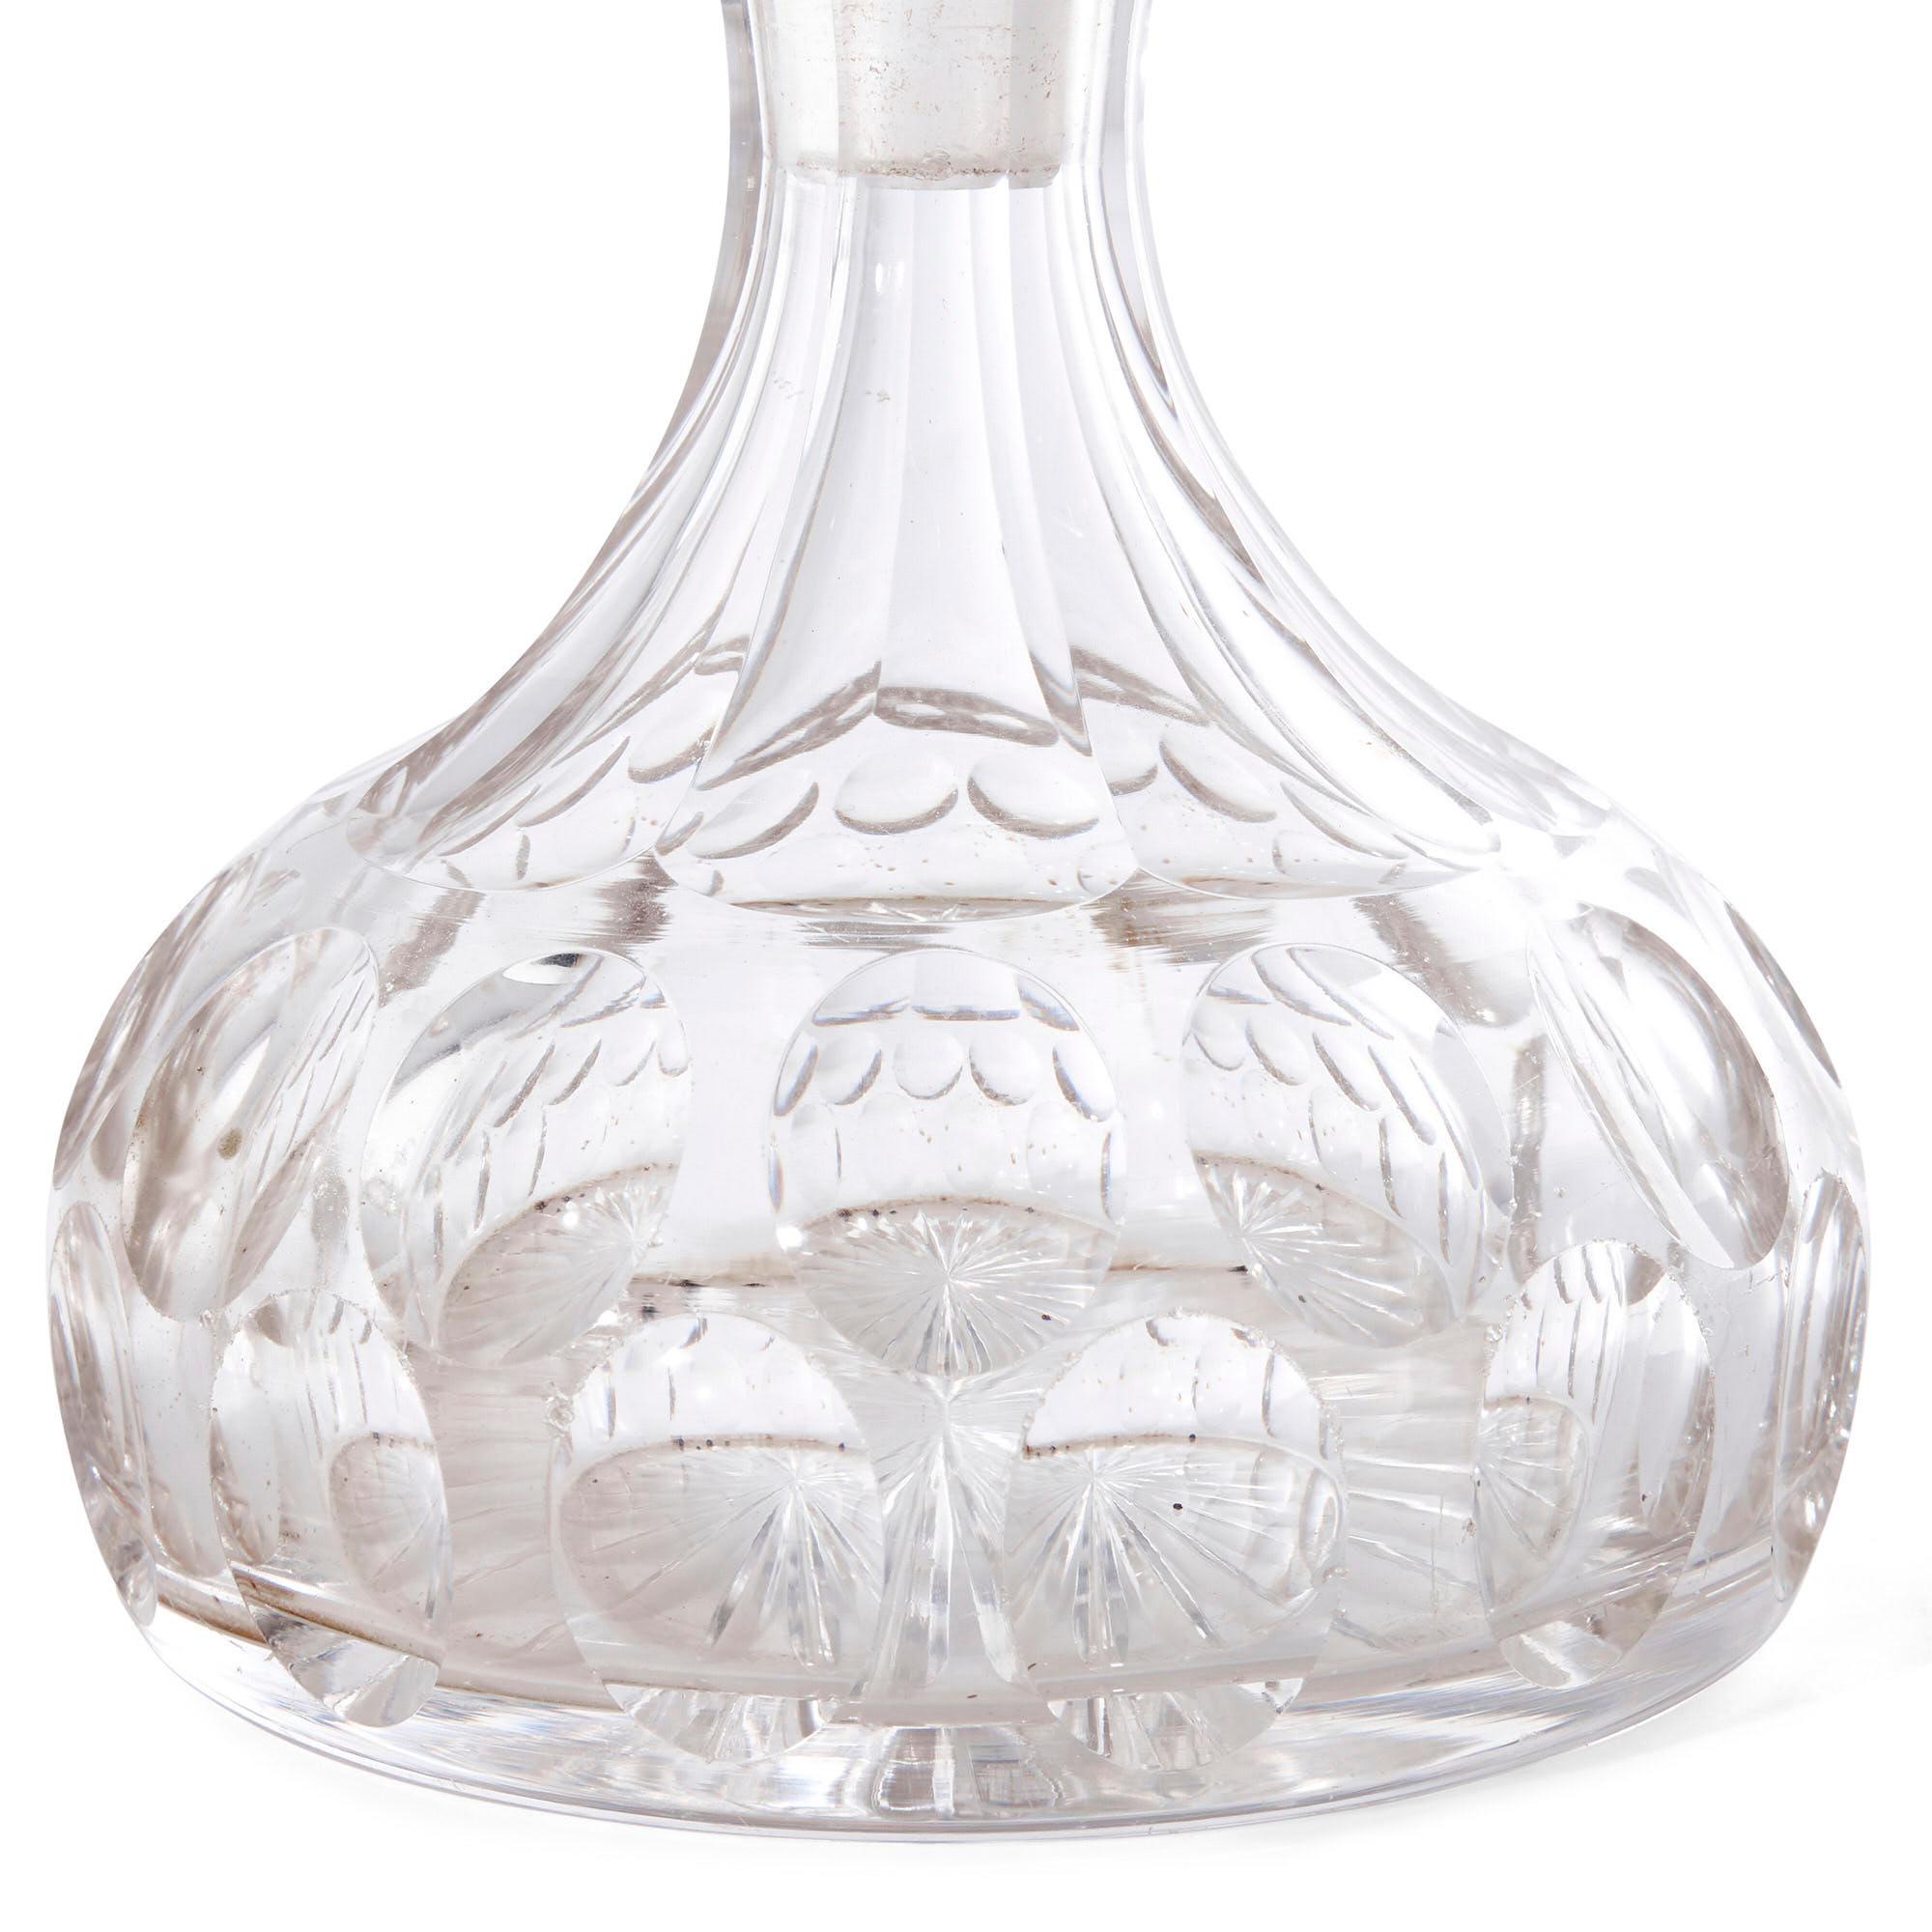 19th Century Pair of French Cut Glass Decanters with Six Glasses For Sale